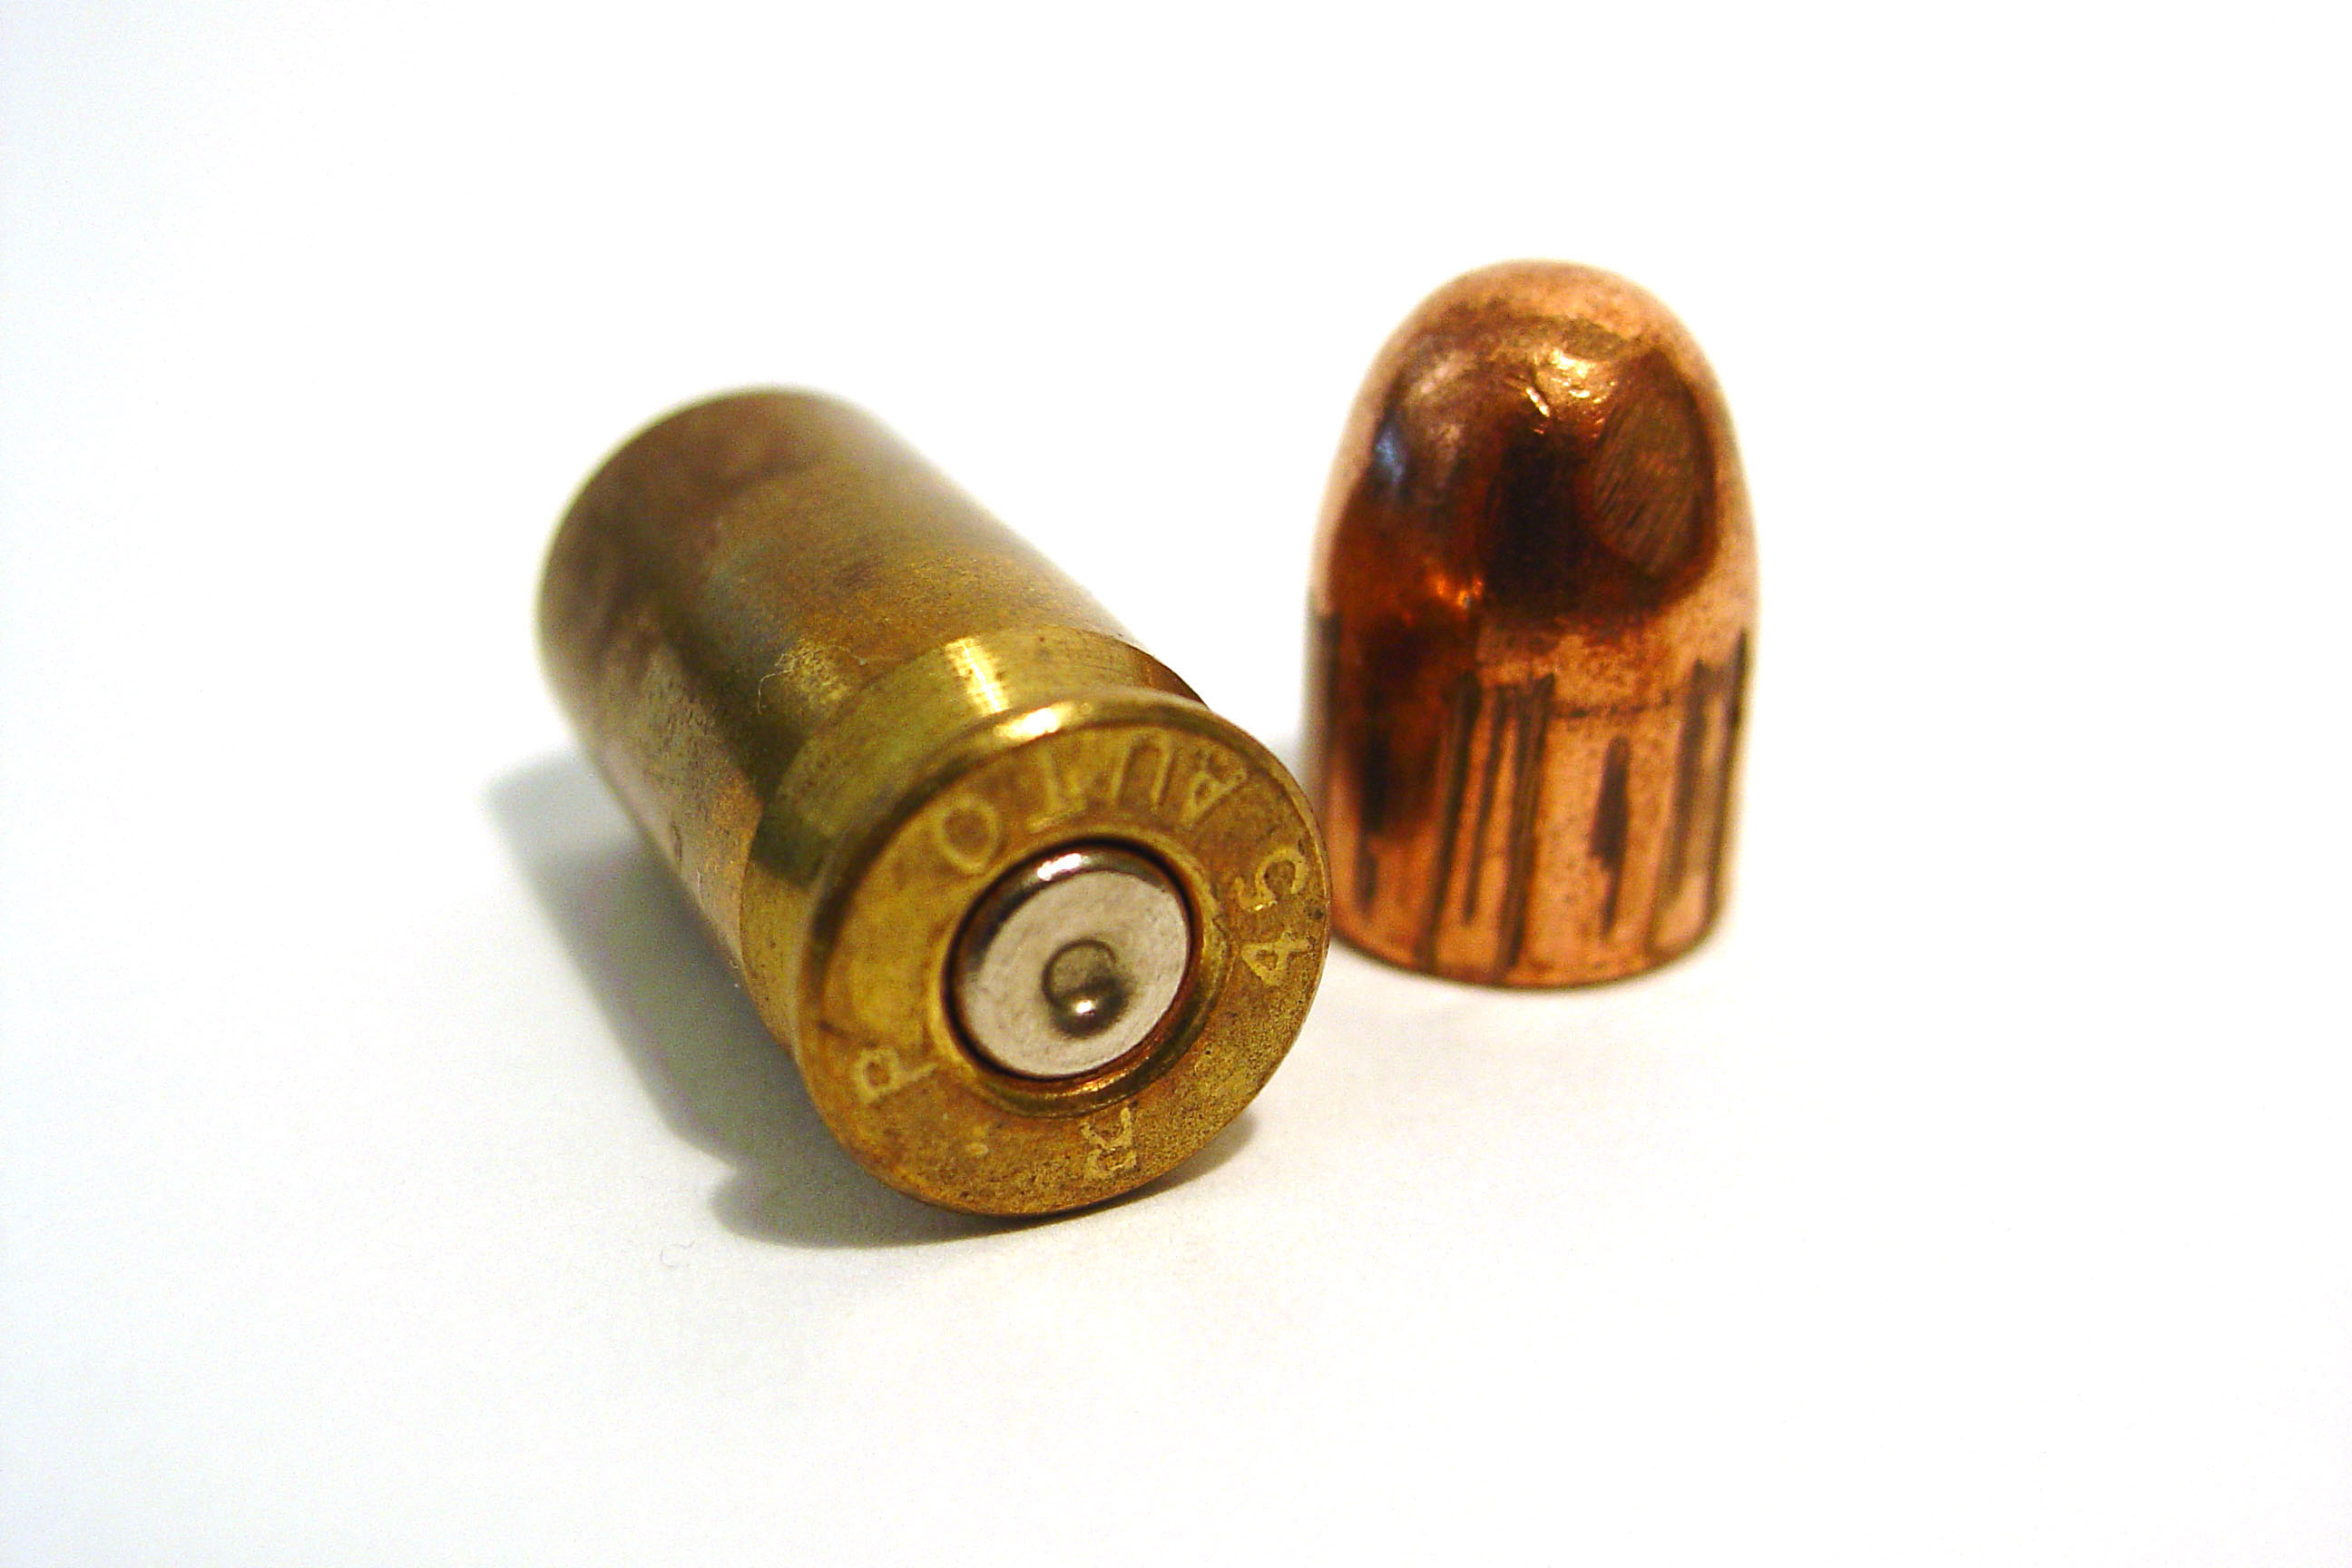 Cartridge Case and Bullet